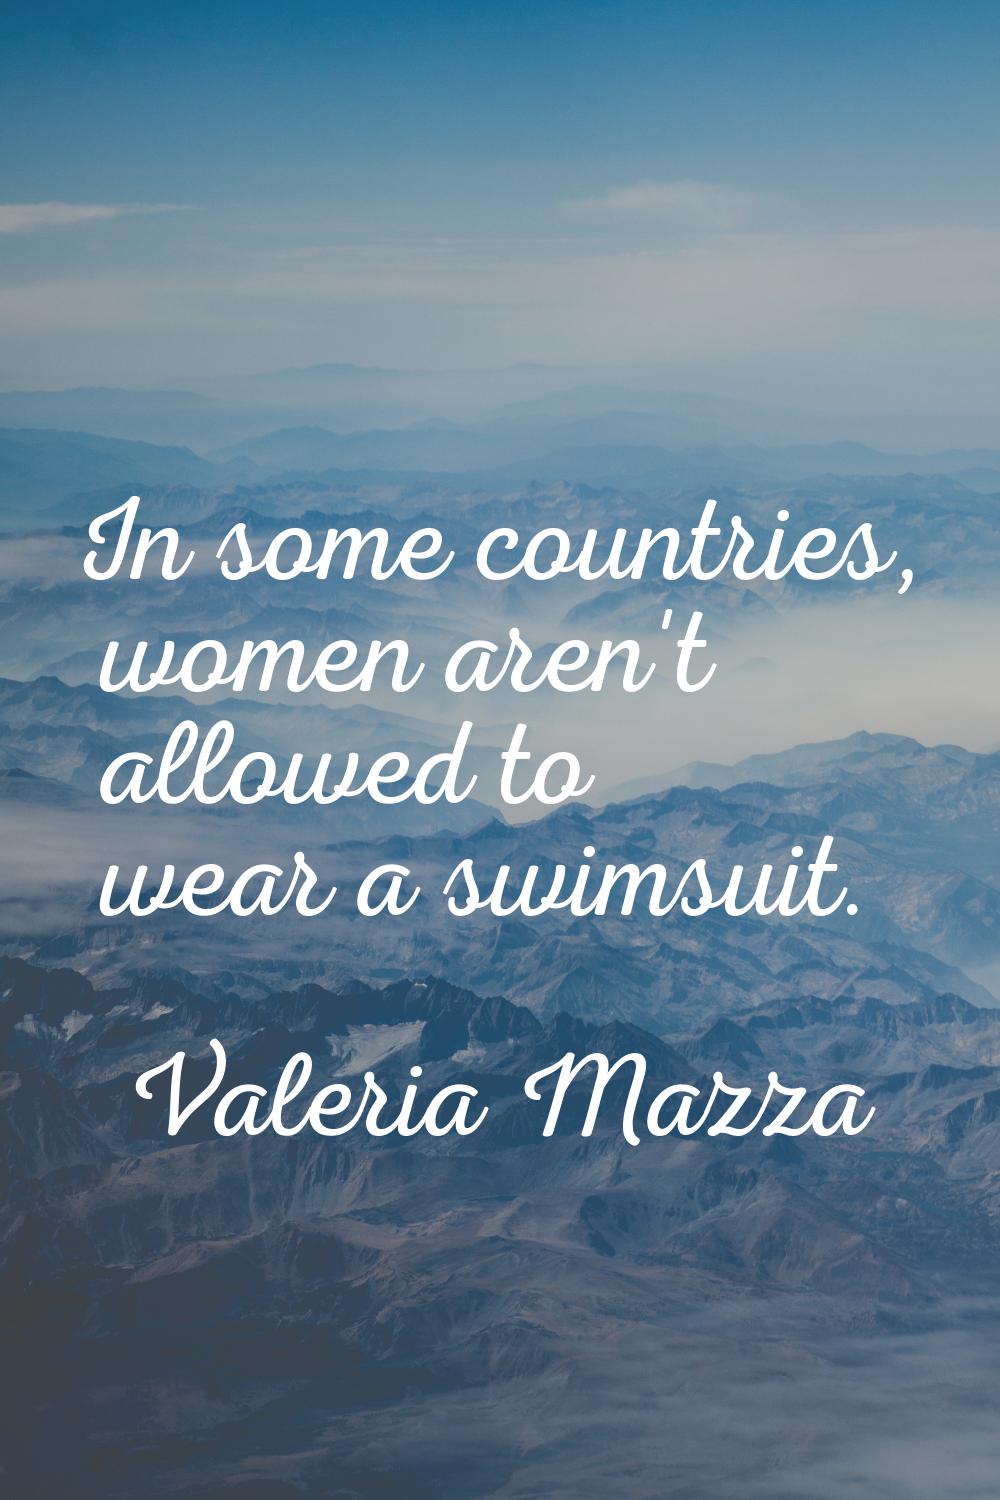 In some countries, women aren't allowed to wear a swimsuit.